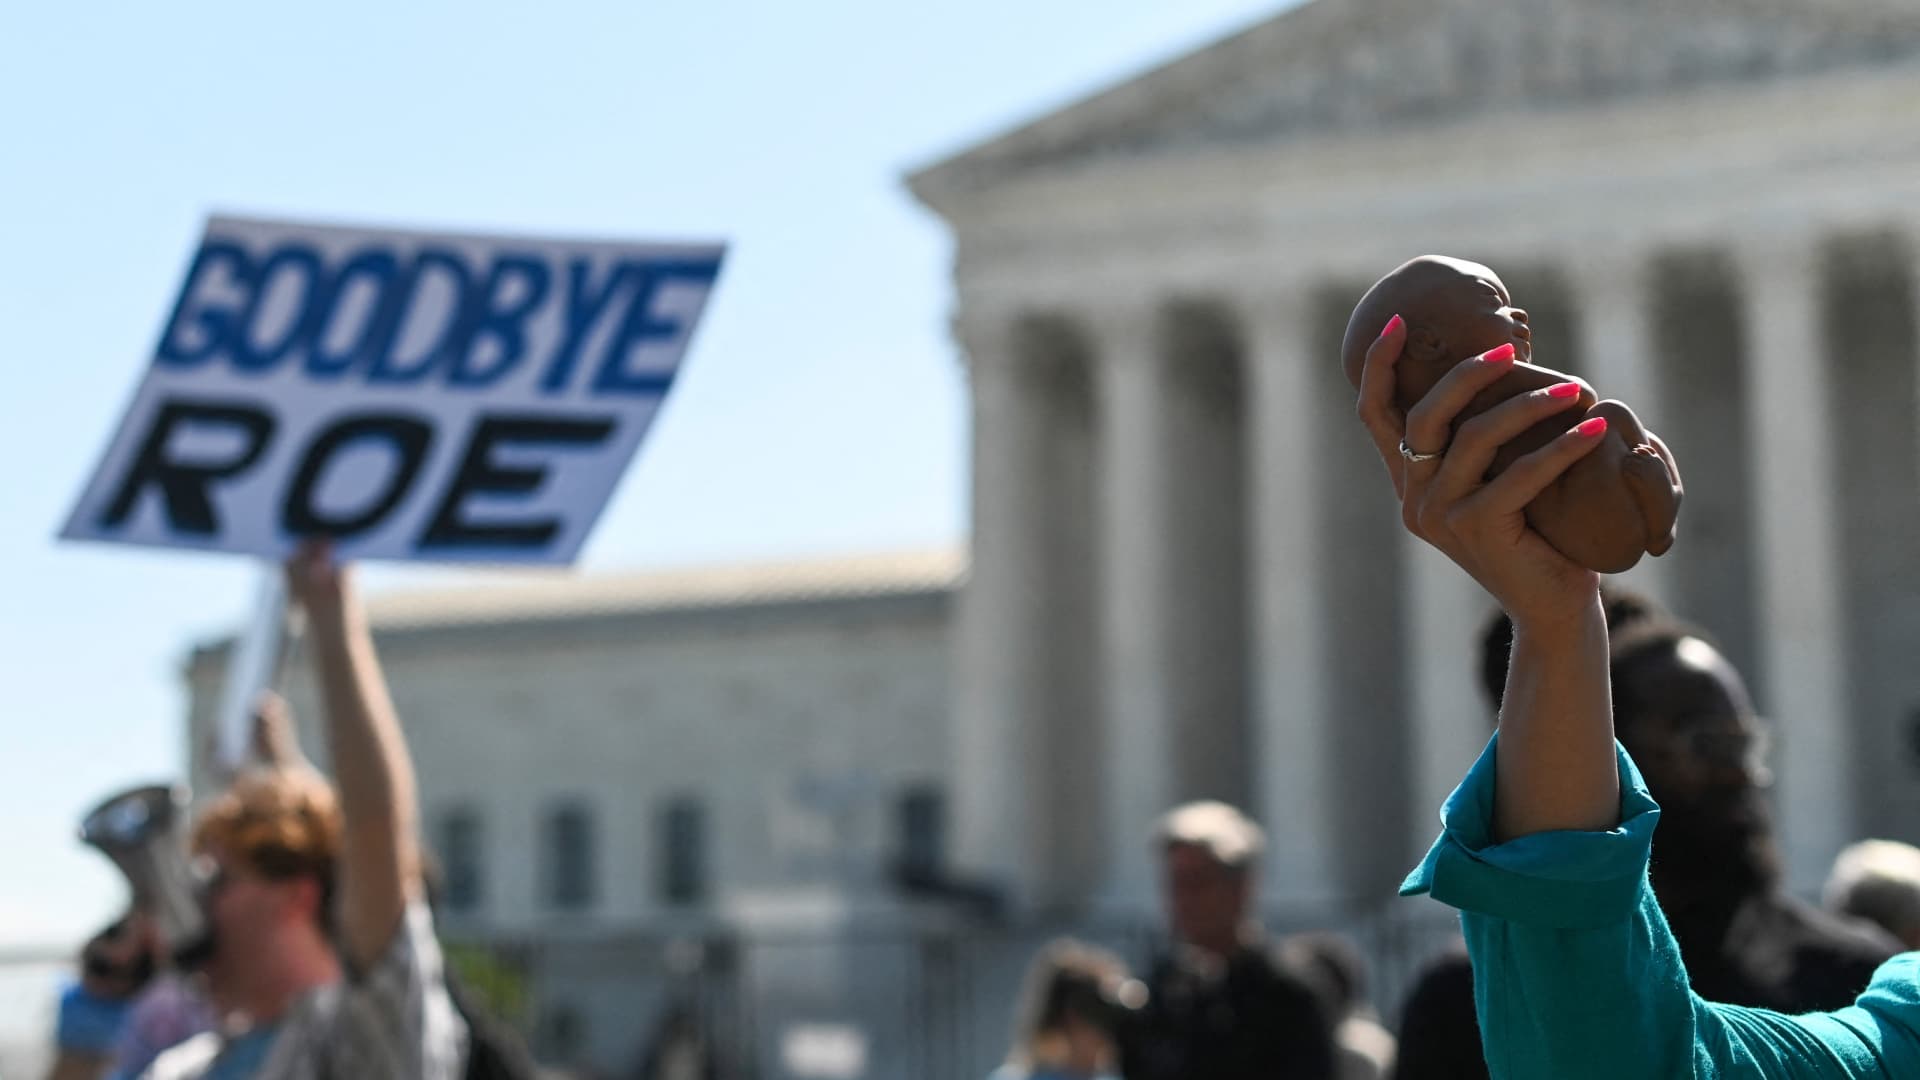 Anti-abortion protestors march in front of the U.S. Supreme Court building as the court considers overturning Roe v. Wade on June 13, 2022, in Washington, DC.